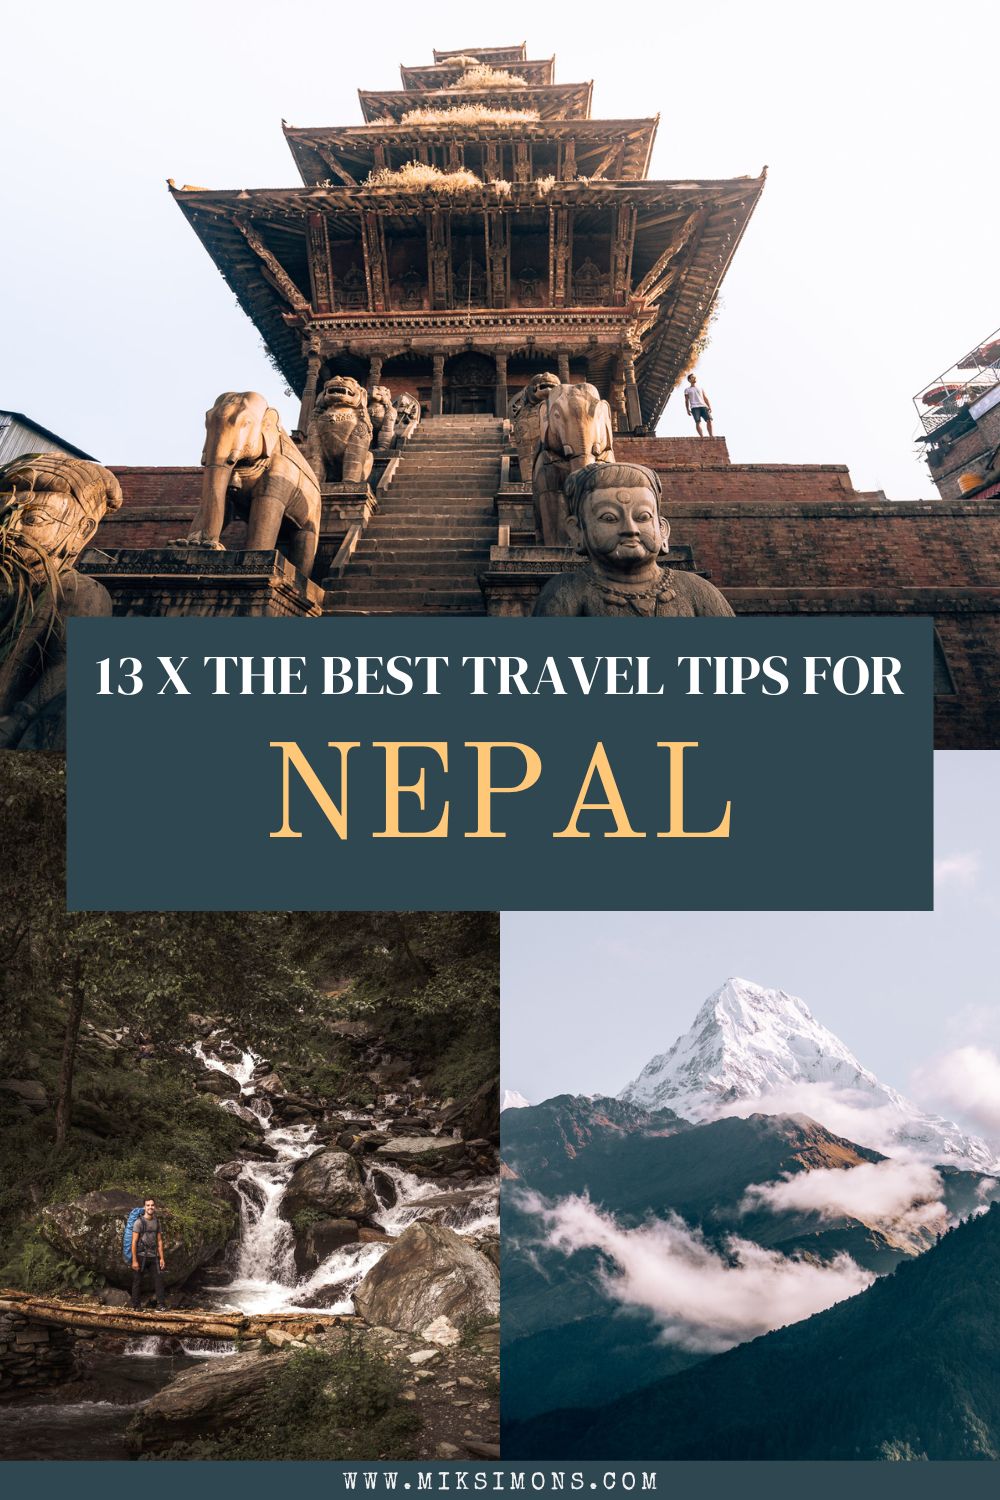 13 AMAZING TRAVEL TIPS FOR NEPAL - THINGS YOU NEED TO KNOW3